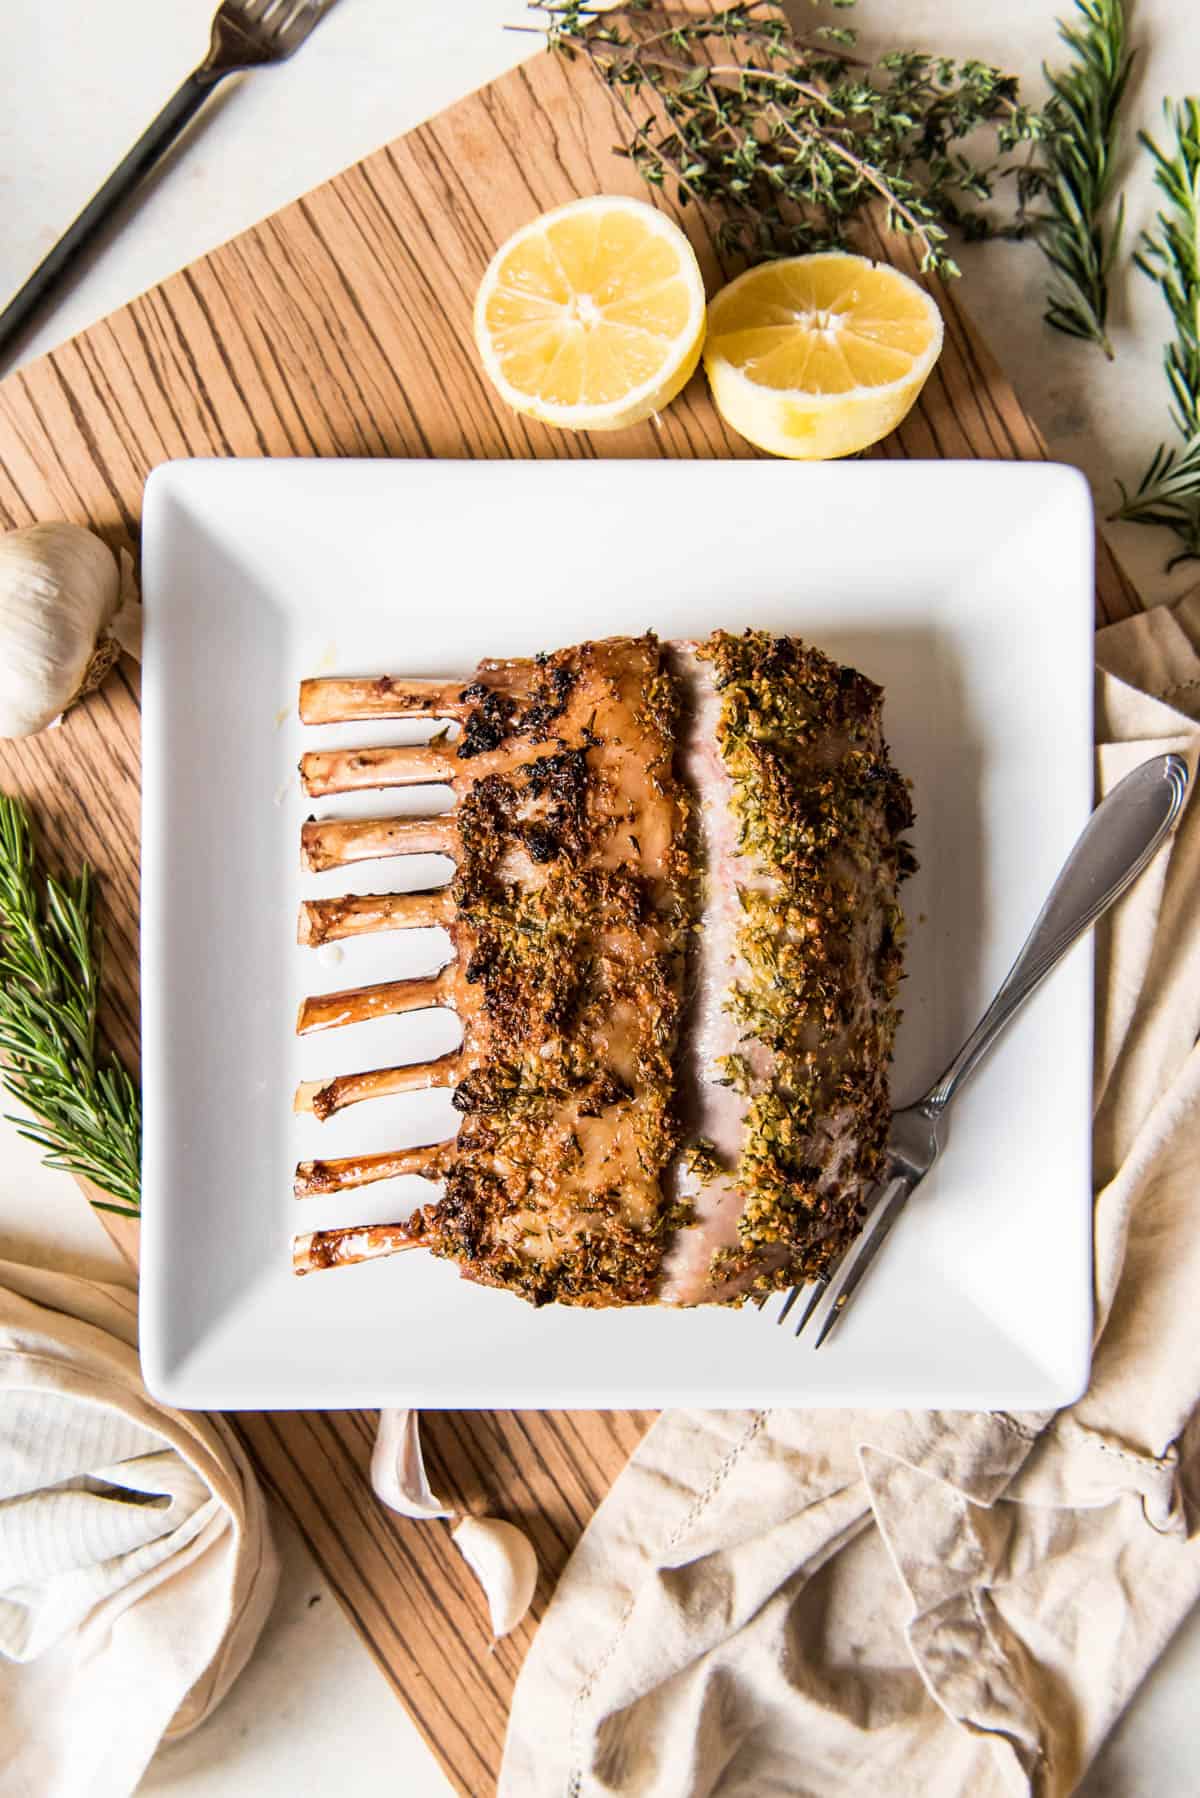 Cooked rosemary garlic rack of lamb on white plate with fork.